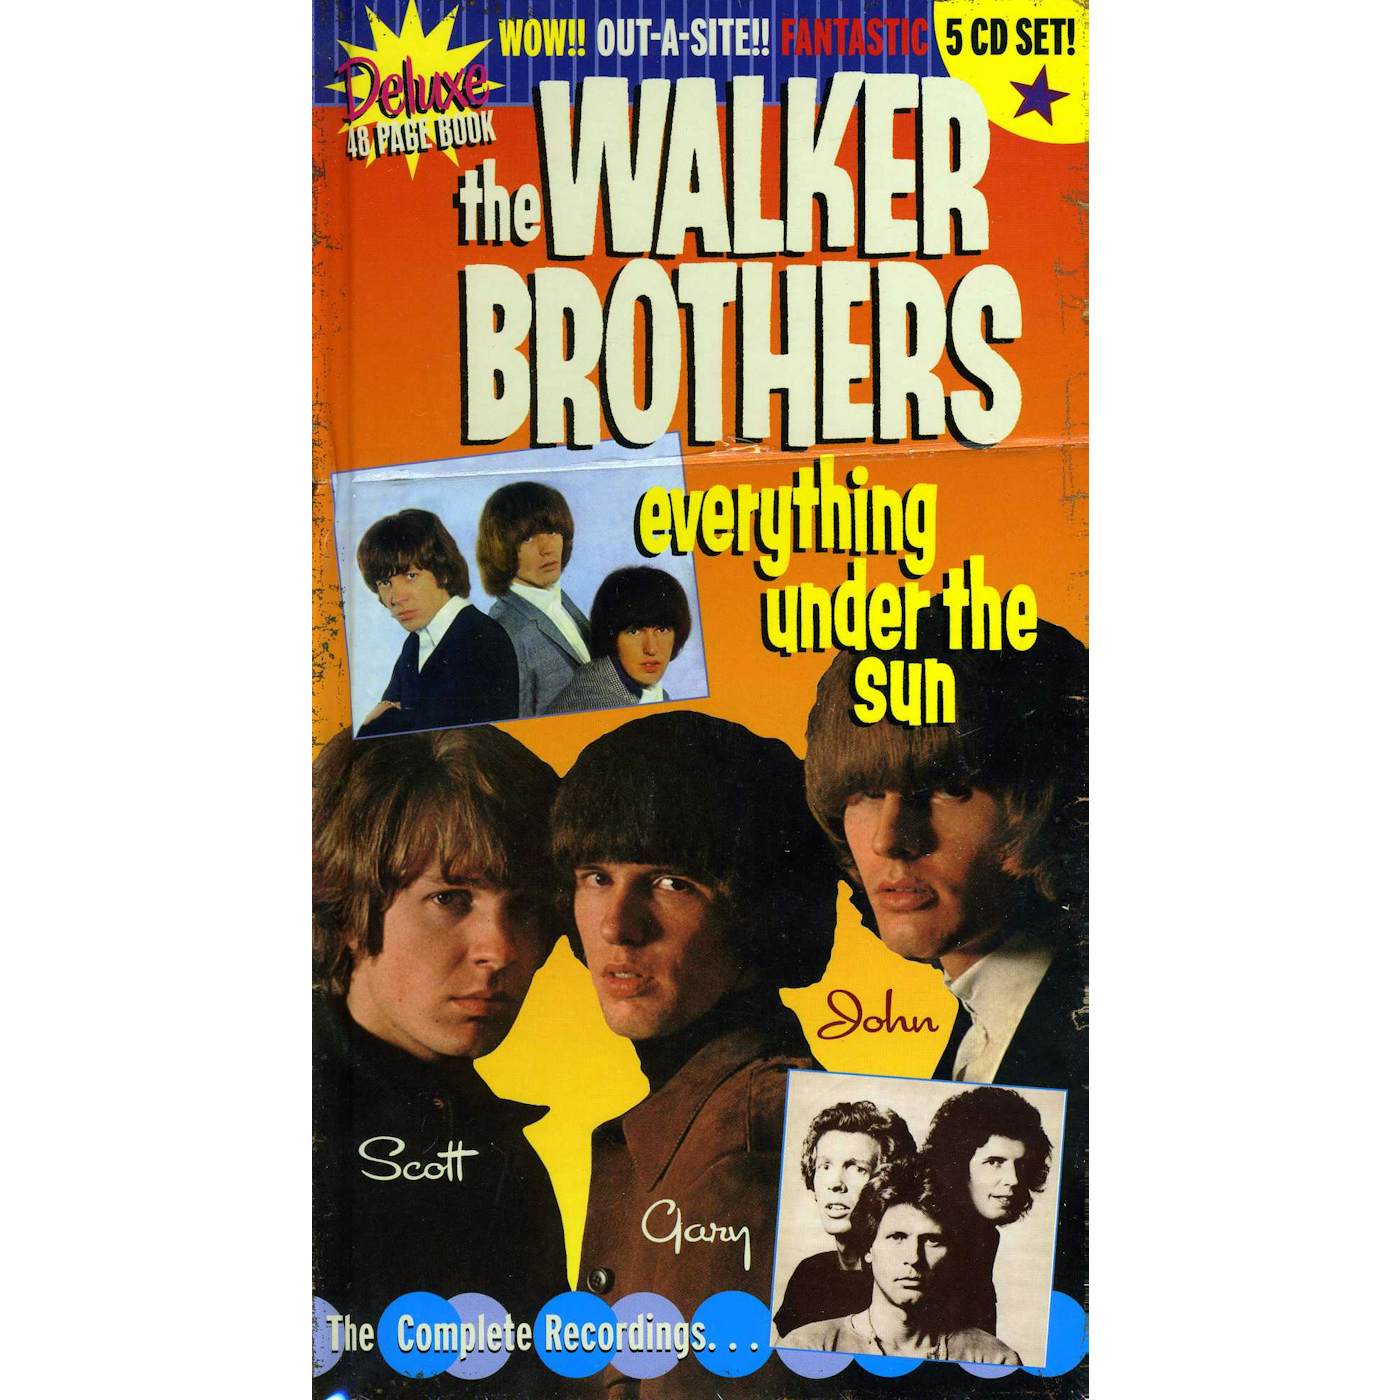 The Walker Brothers EVERYTHING UNDER THE SUN CD